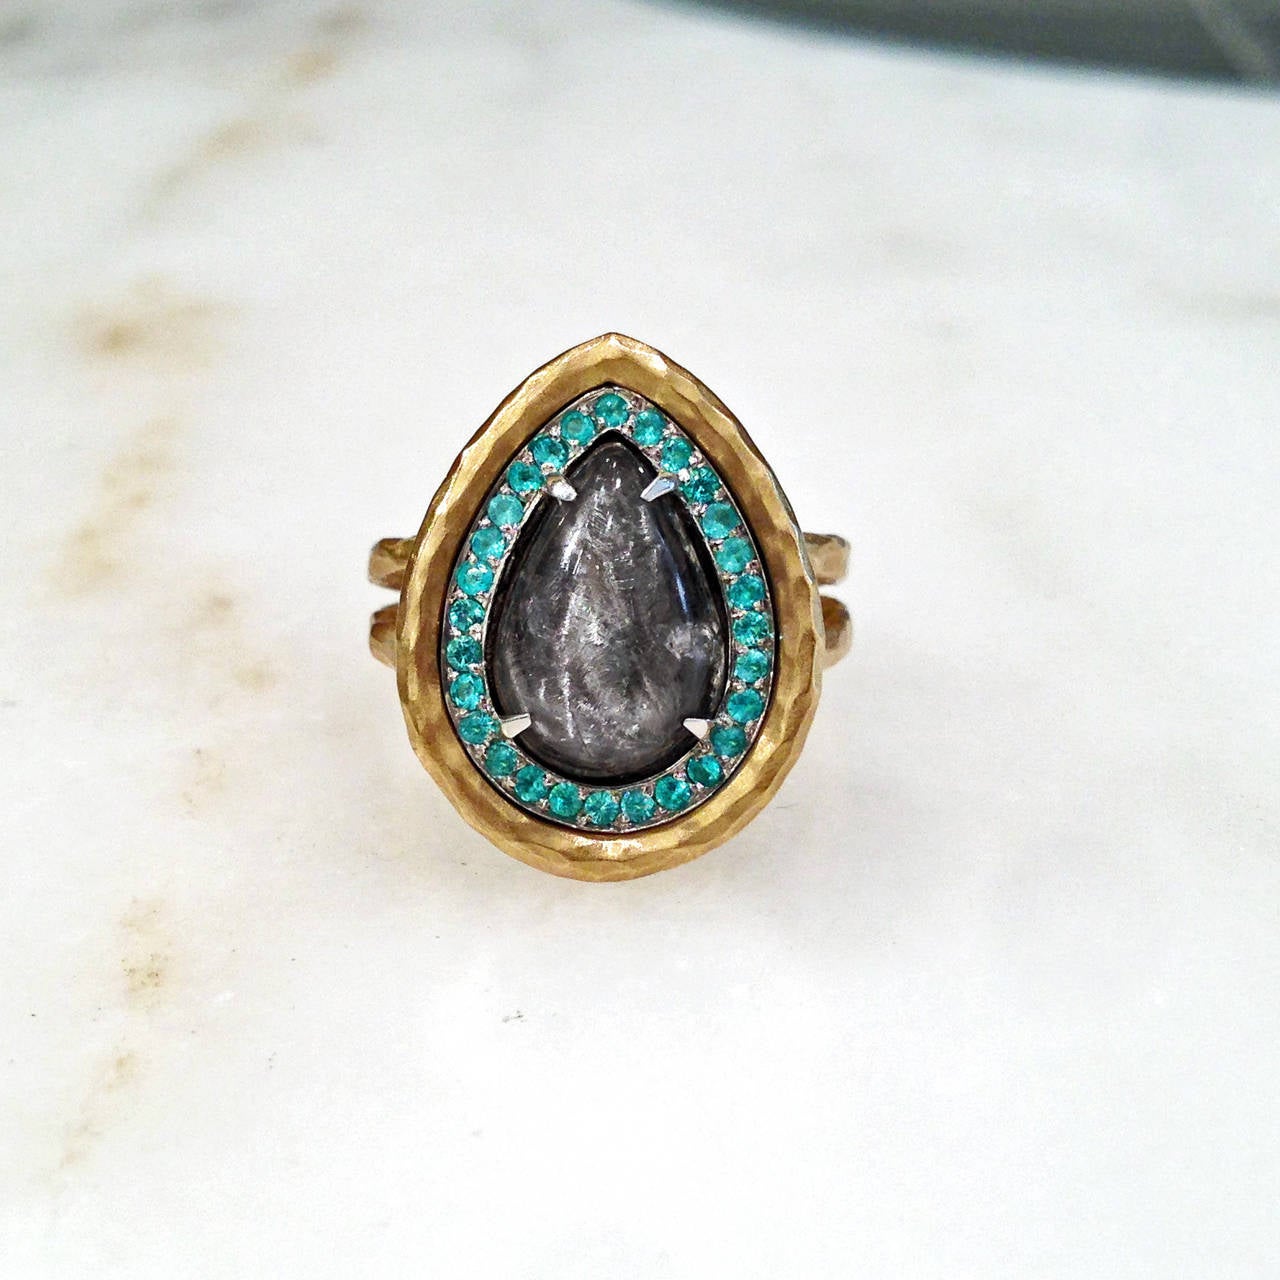 One-of-a-Kind Empress Ring handcrafted in 'crushed' 18k yellow gold with a 3.57 carat pear-shaped, cabochon-cut platinum rutilated quartz surrounded by 0.22 carats of Brazilian Paraiba tourmaline set in 18k white gold. Size 6.25 (can be sized).